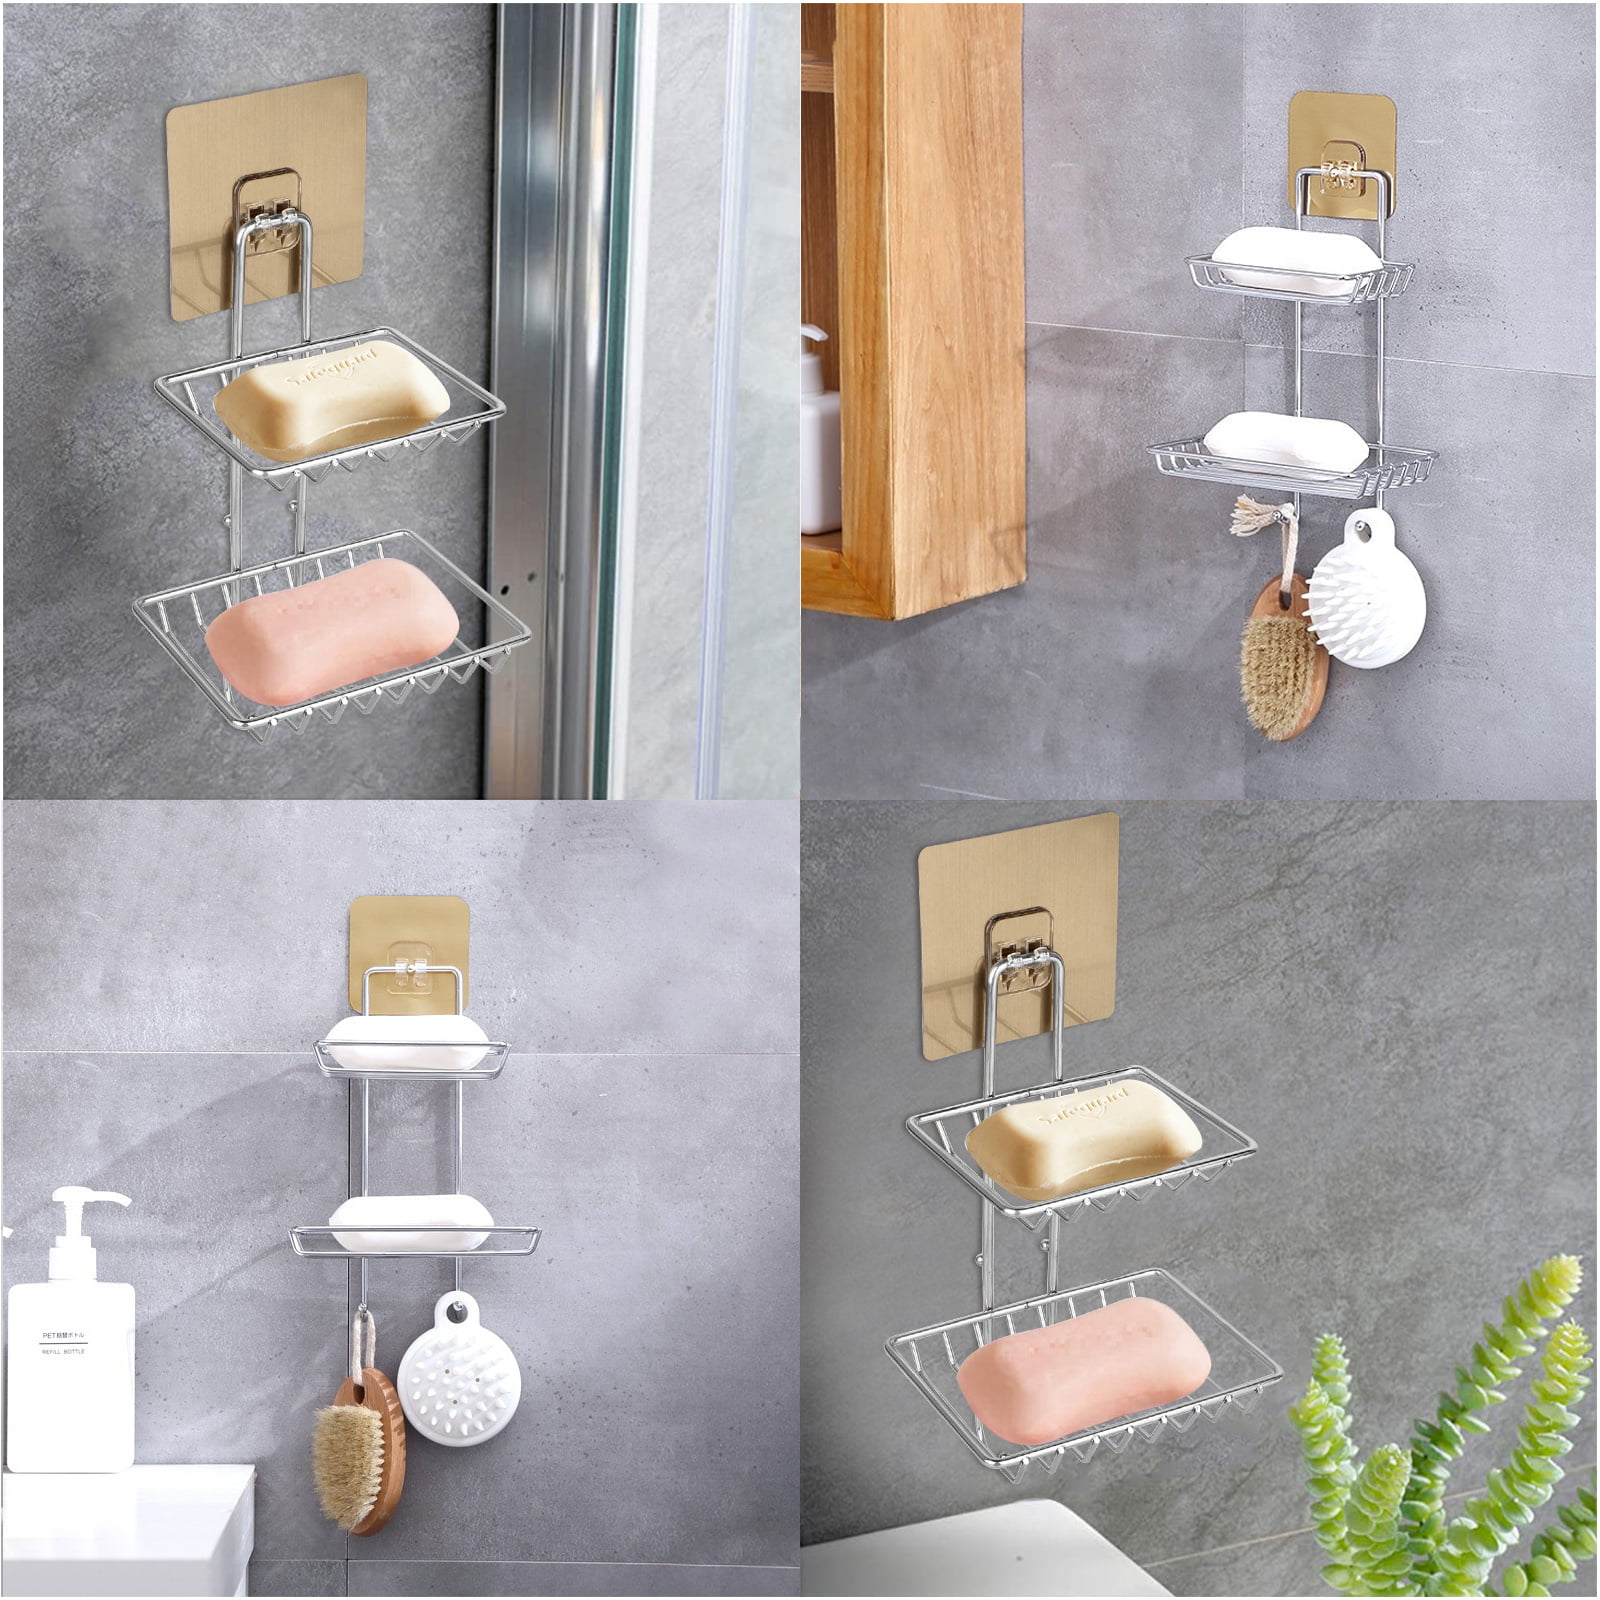 Moforoco Double Soap Bar Holder for Shower, No Drilling, 304 Rustproof  Stainless Steel, Wall Mounted Soap Holder with 4 Hooks and Razor Holder,  Shower